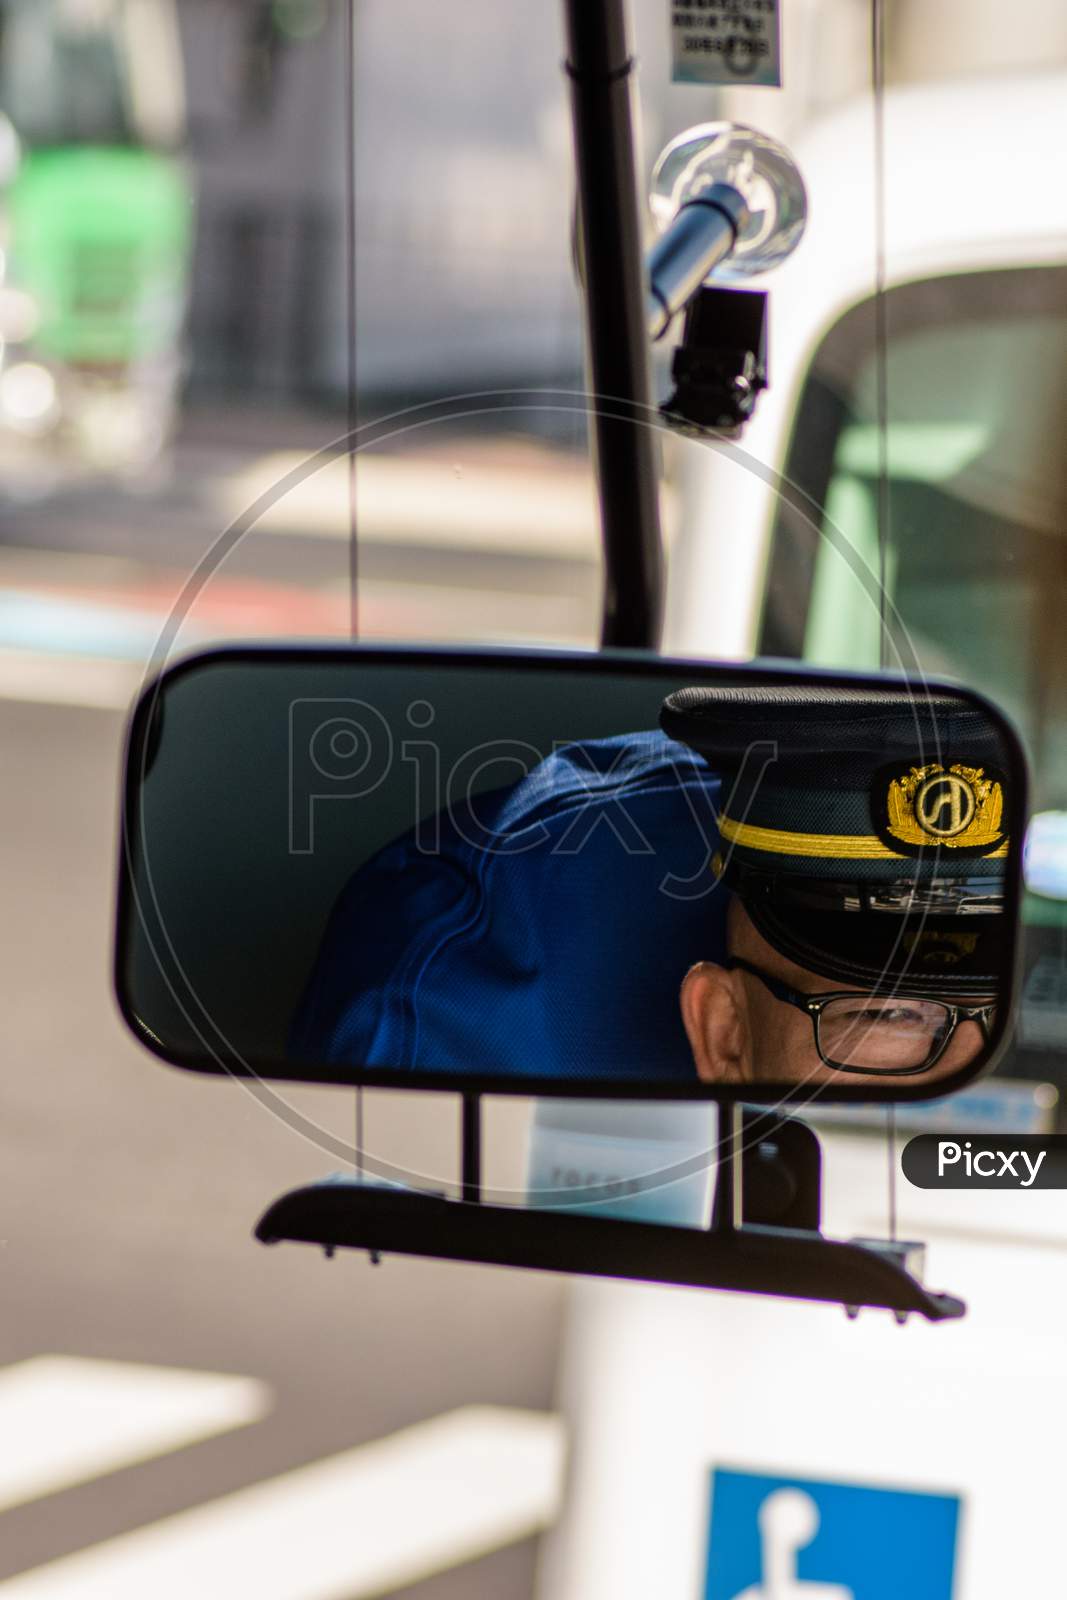 Bus Driver Taking A Look In The Rear View Mirror, Hiroshima, Japan